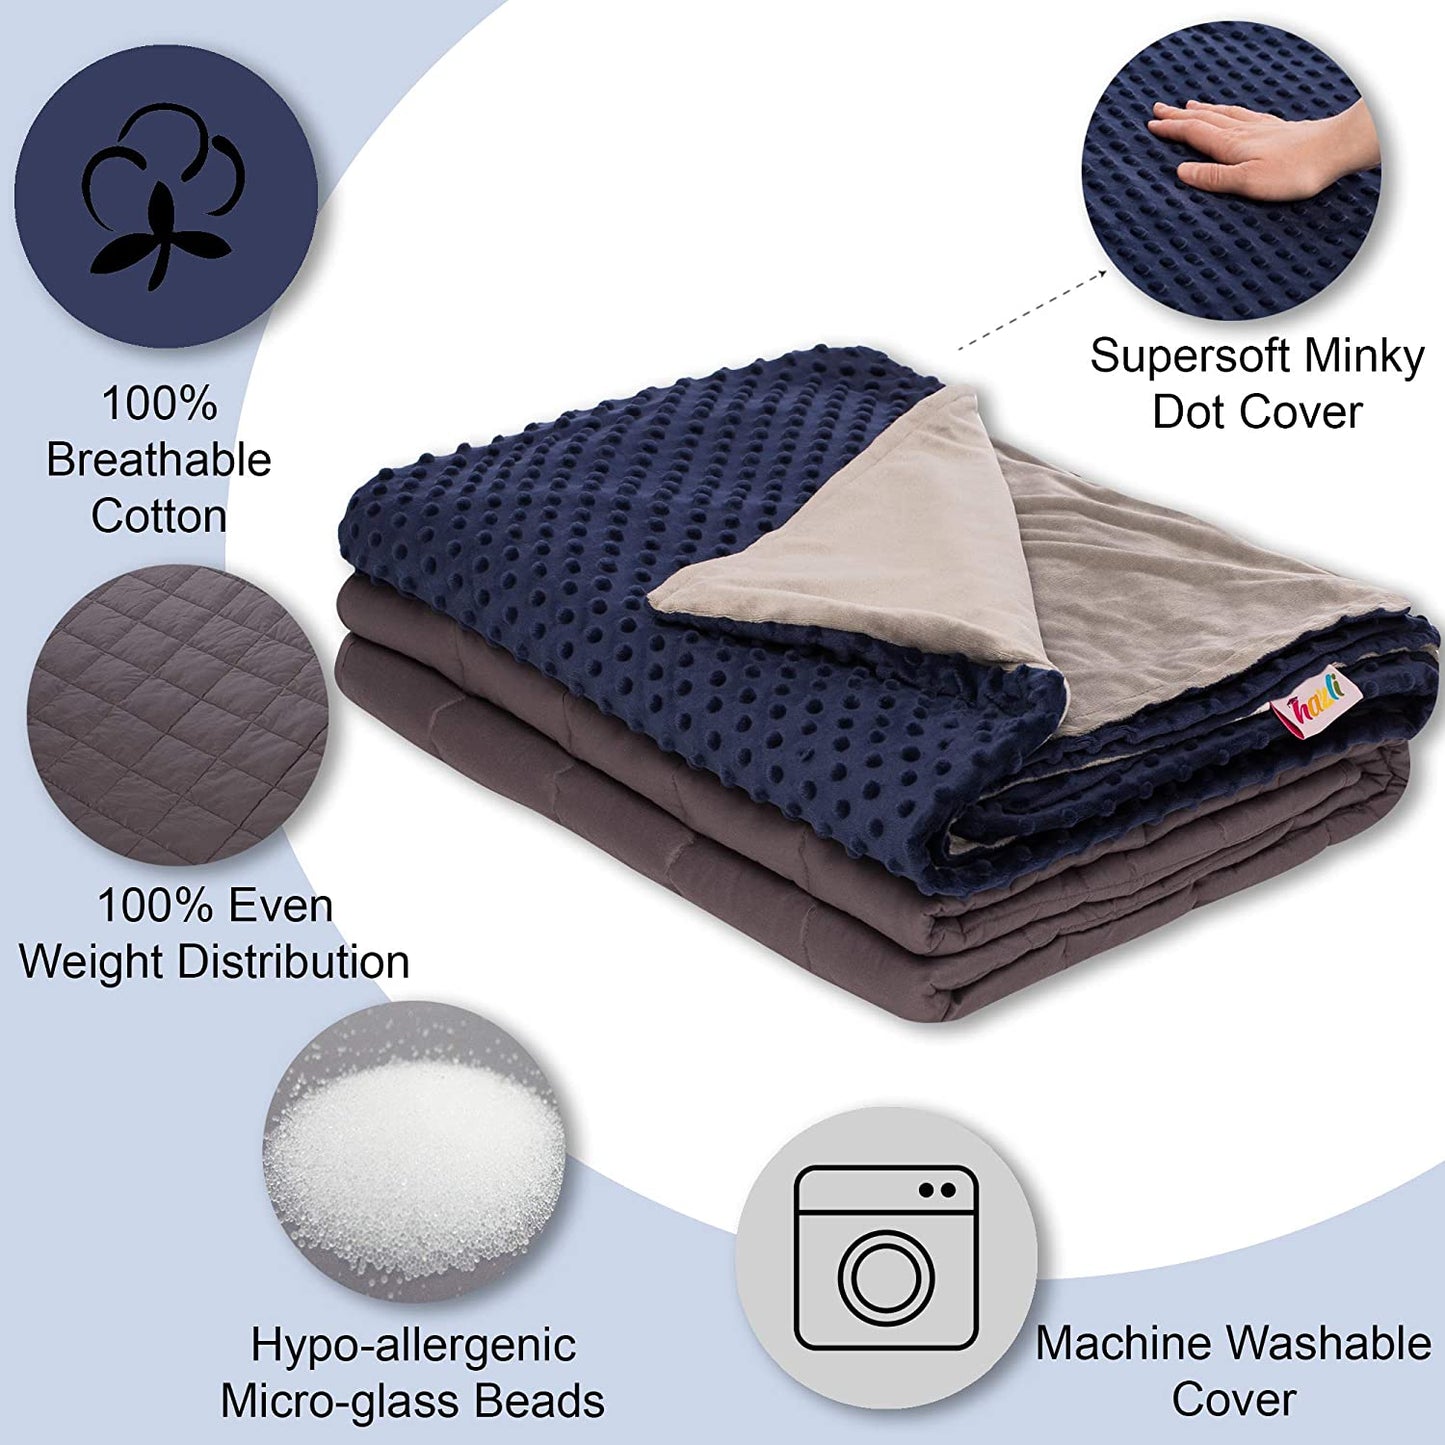 Super Soft 15 lbs Weighted Blanket with Removable Cover - 48 x 72 inch Comfort Weighted Blankets - Adult Heavy Blanket Twin Size Navy Blue - Hazli Collection 